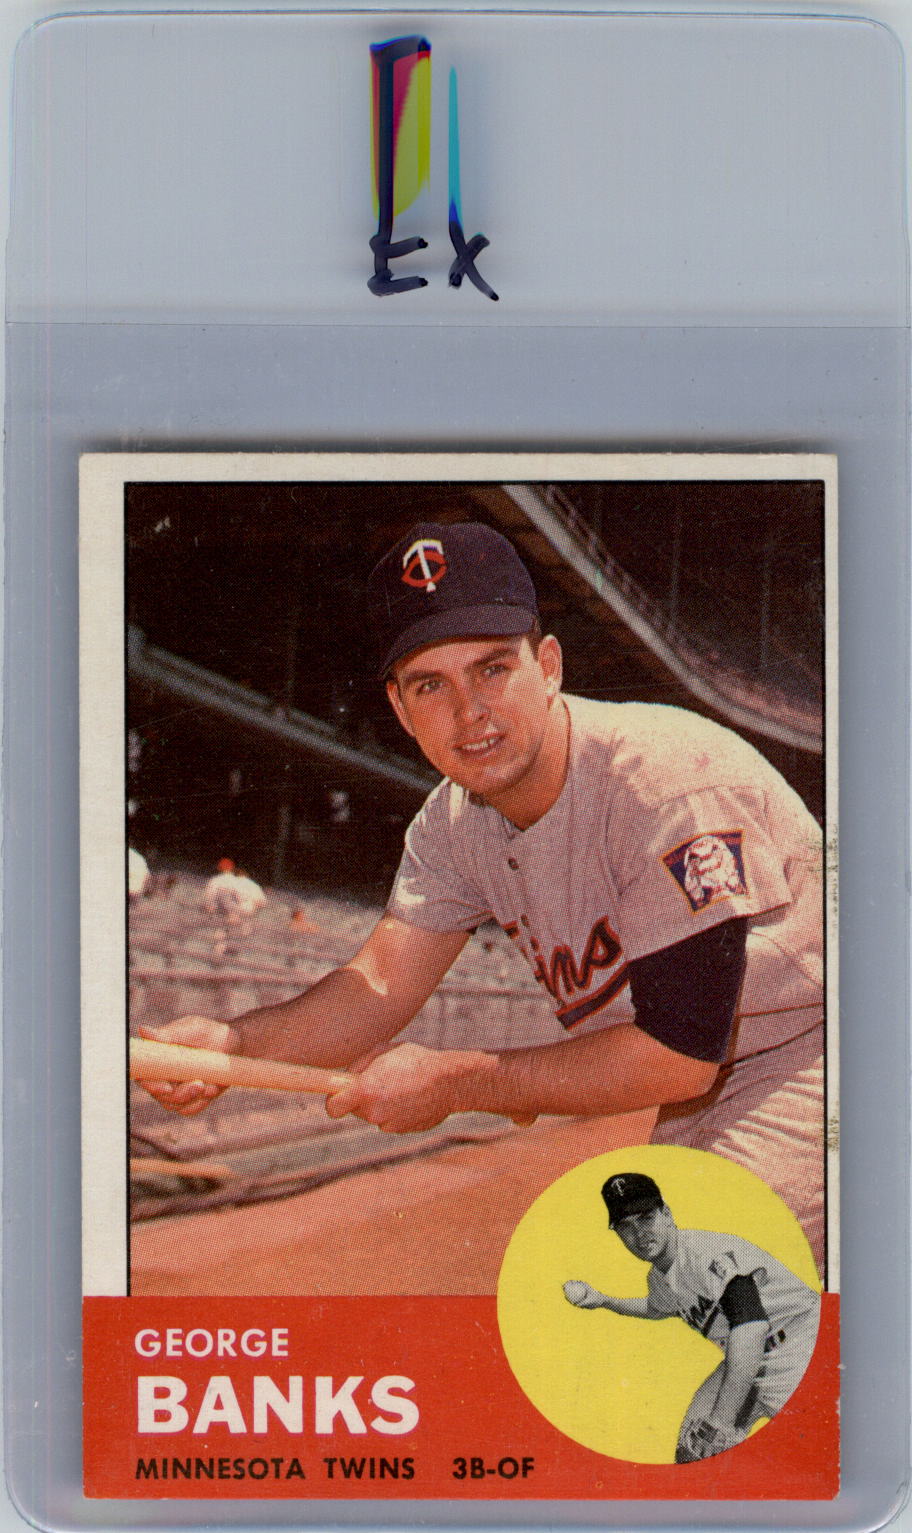 1963 Topps #564 George Banks RC